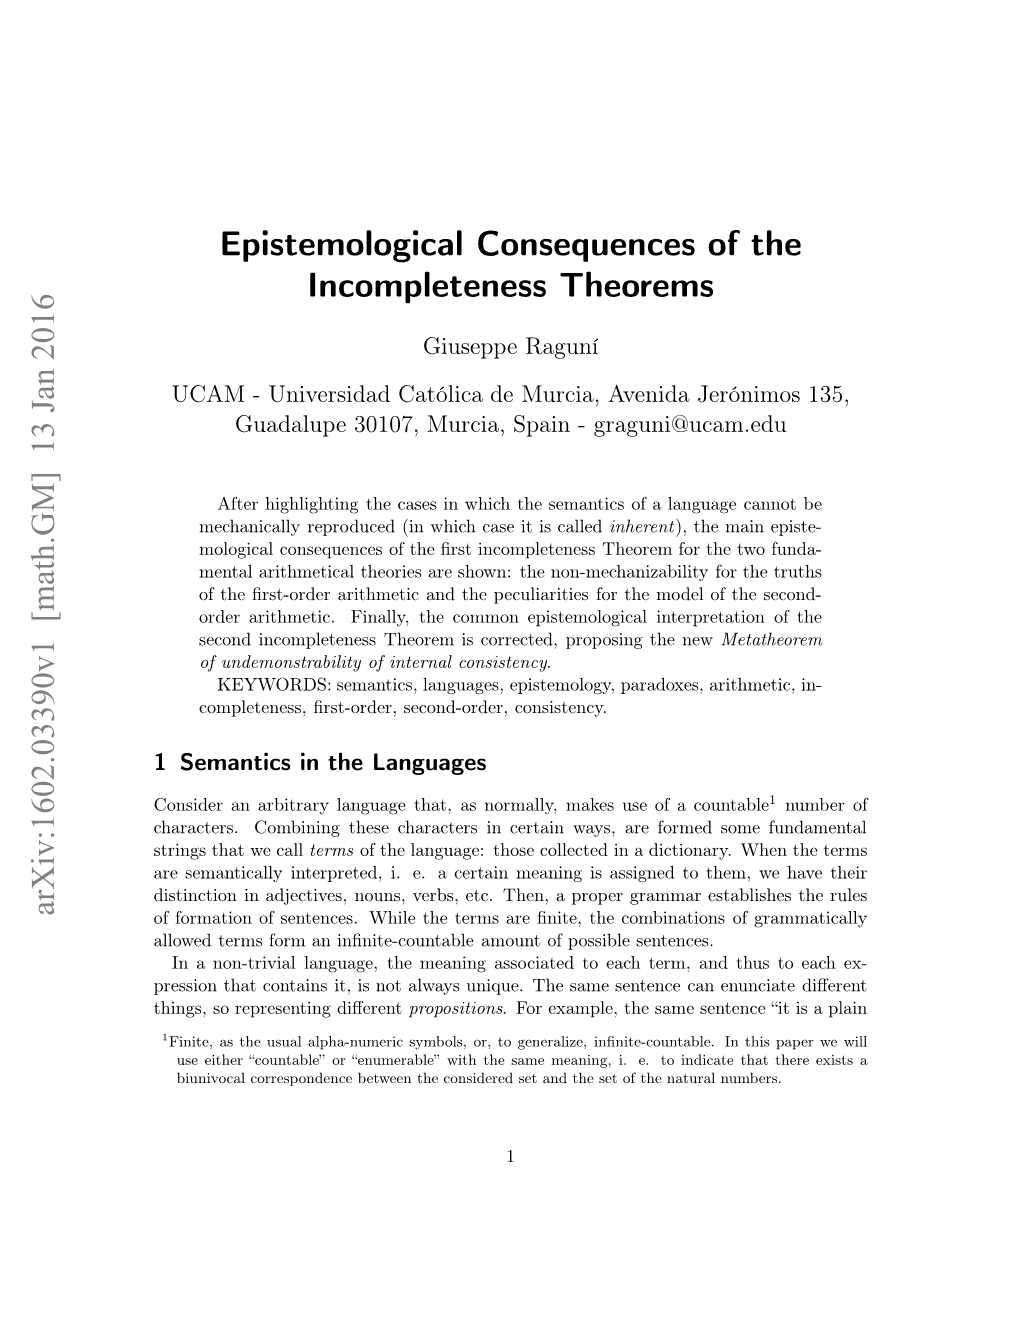 Epistemological Consequences of the Incompleteness Theorems